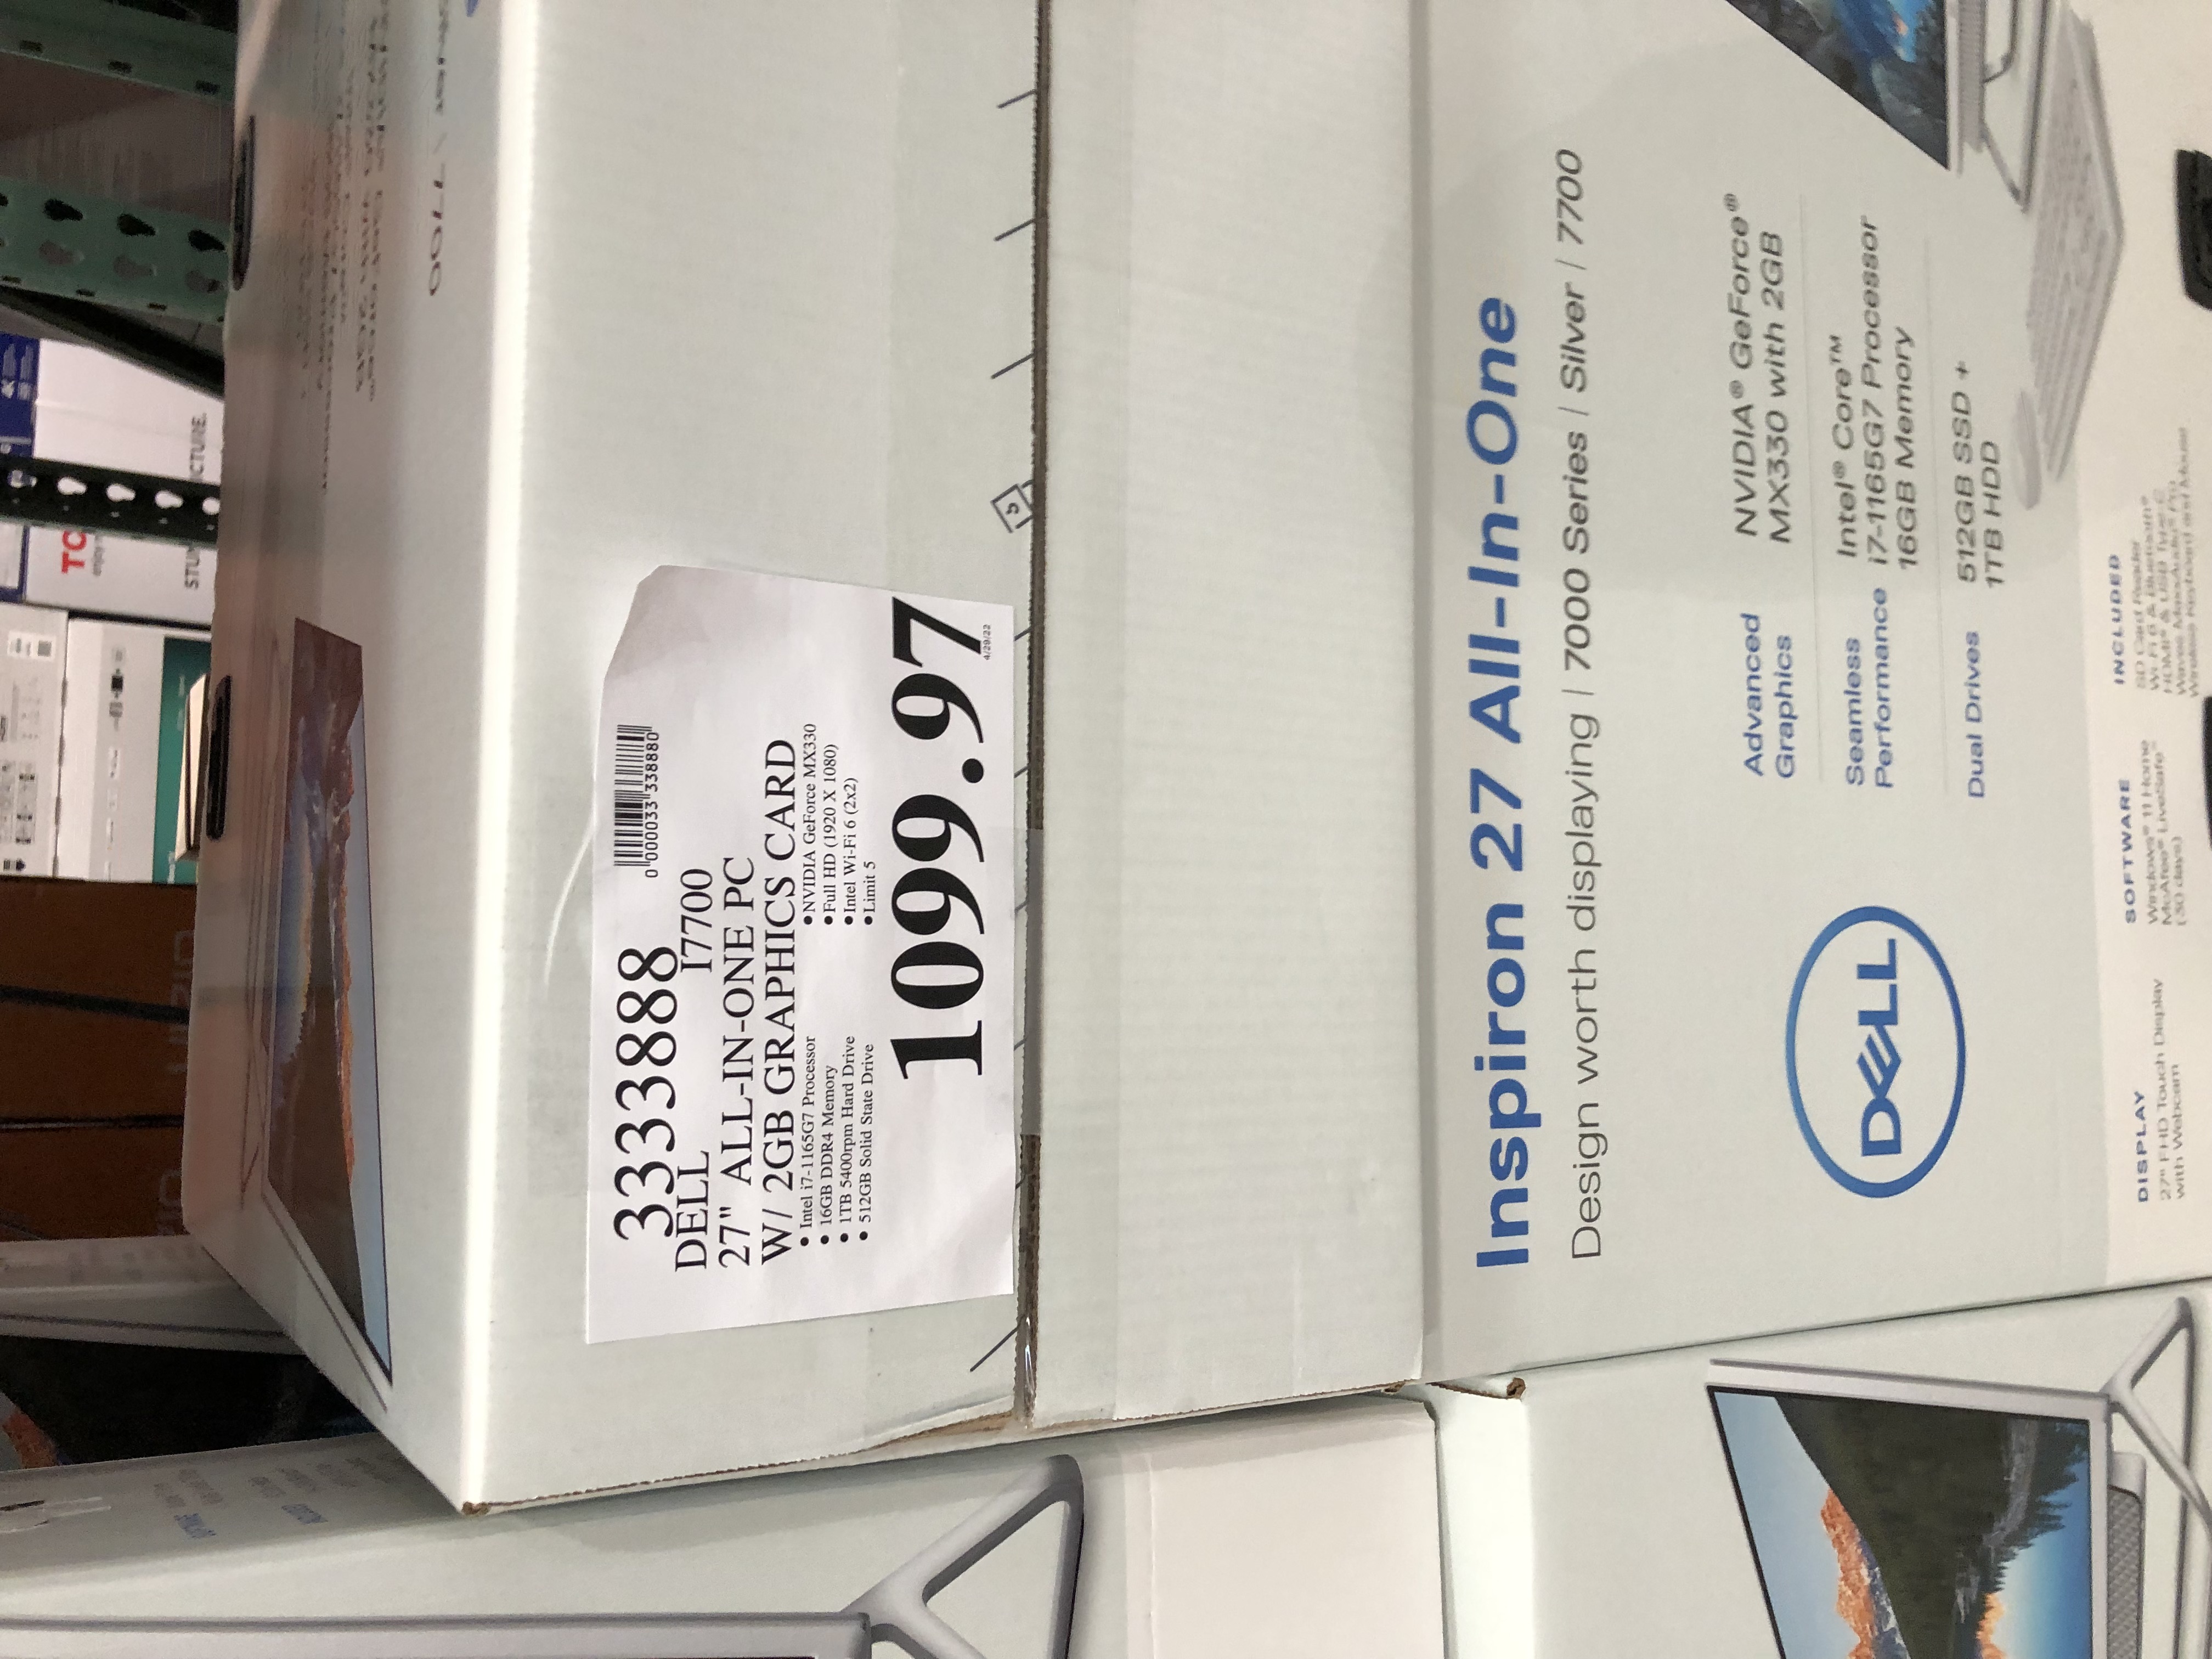 Dell Inspiron 27 7000 Series All-in-One Touchscreen Desktop - 11th Gen Intel Core i7-1165G7  -$1099 at B&M YMMV